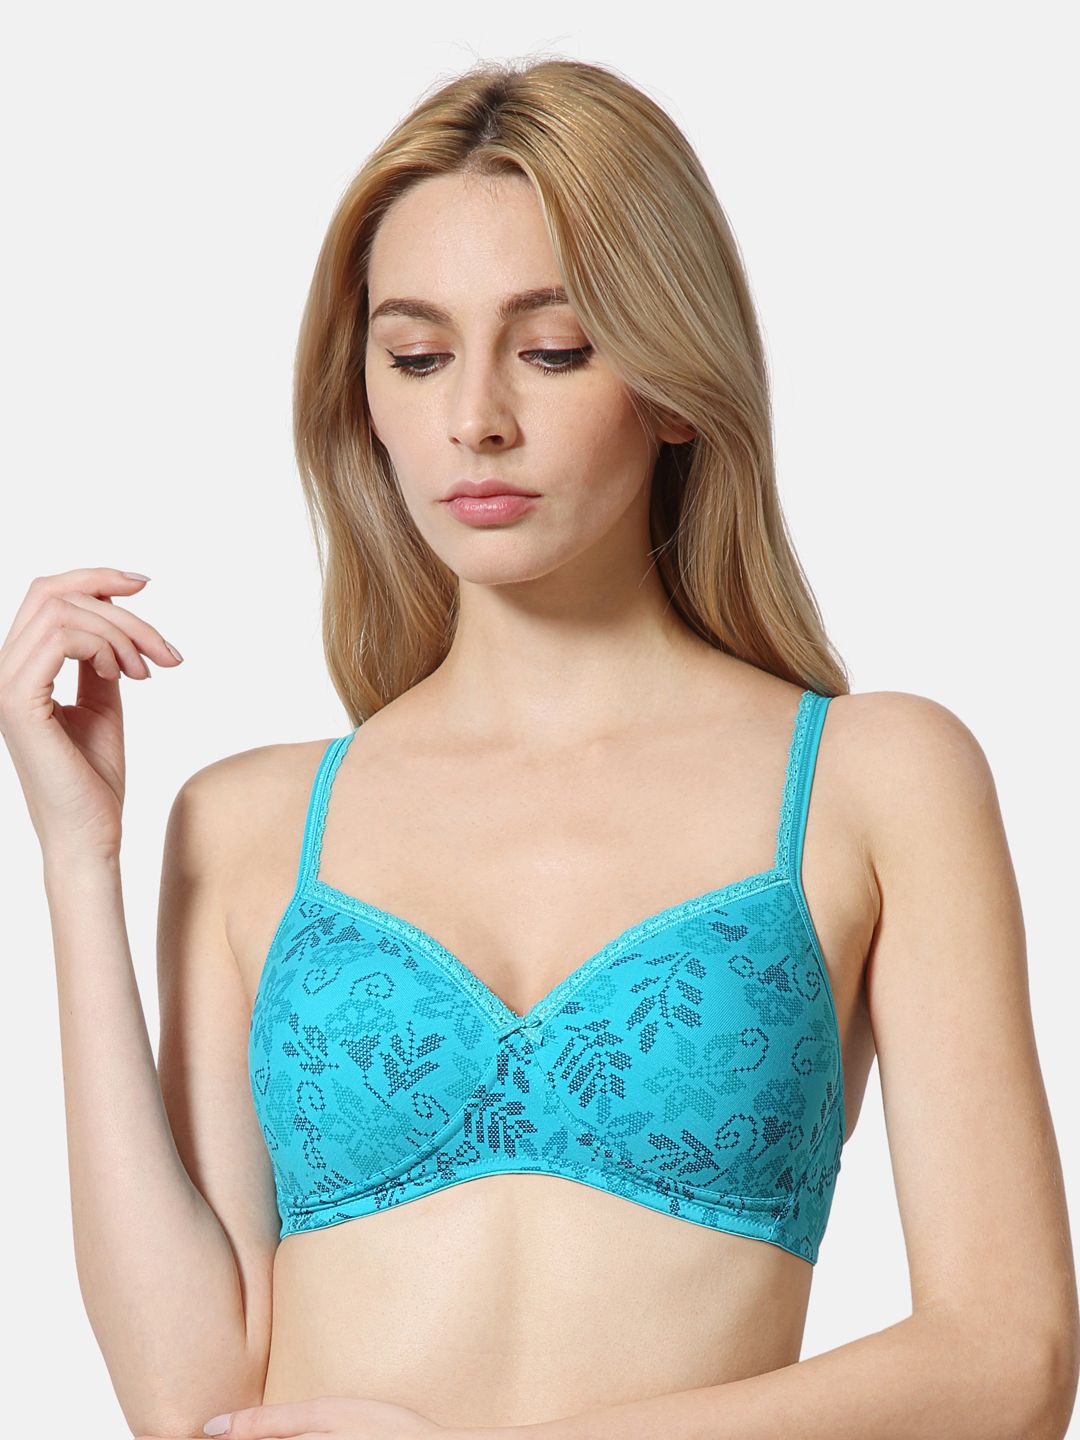 Van Heusen Blue Printed Non-Wired Lightly Padded Everyday Bra ILIBR1CSPIW7811003 Price in India